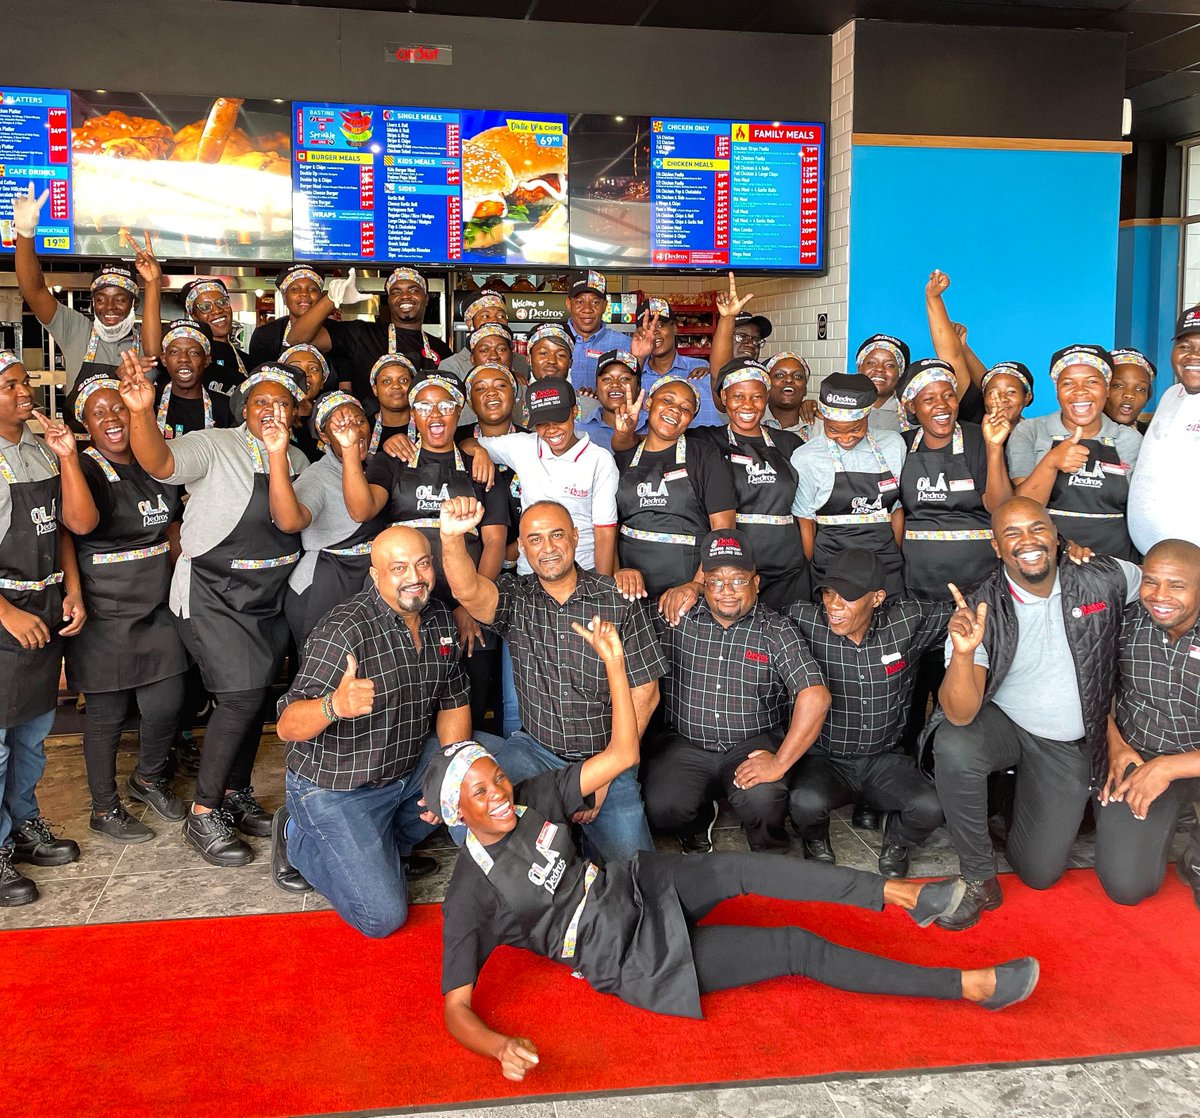 Say ‘Olá!’ to another great new store in Limpopo! Wishing Management & Staff of Pedros Masingita Mall all the best! 
WINNER-WINNER Chicken Dinner! CONGRATS to @Trevor_Bembe, winner of the Opening Competition.
#VivaPedros